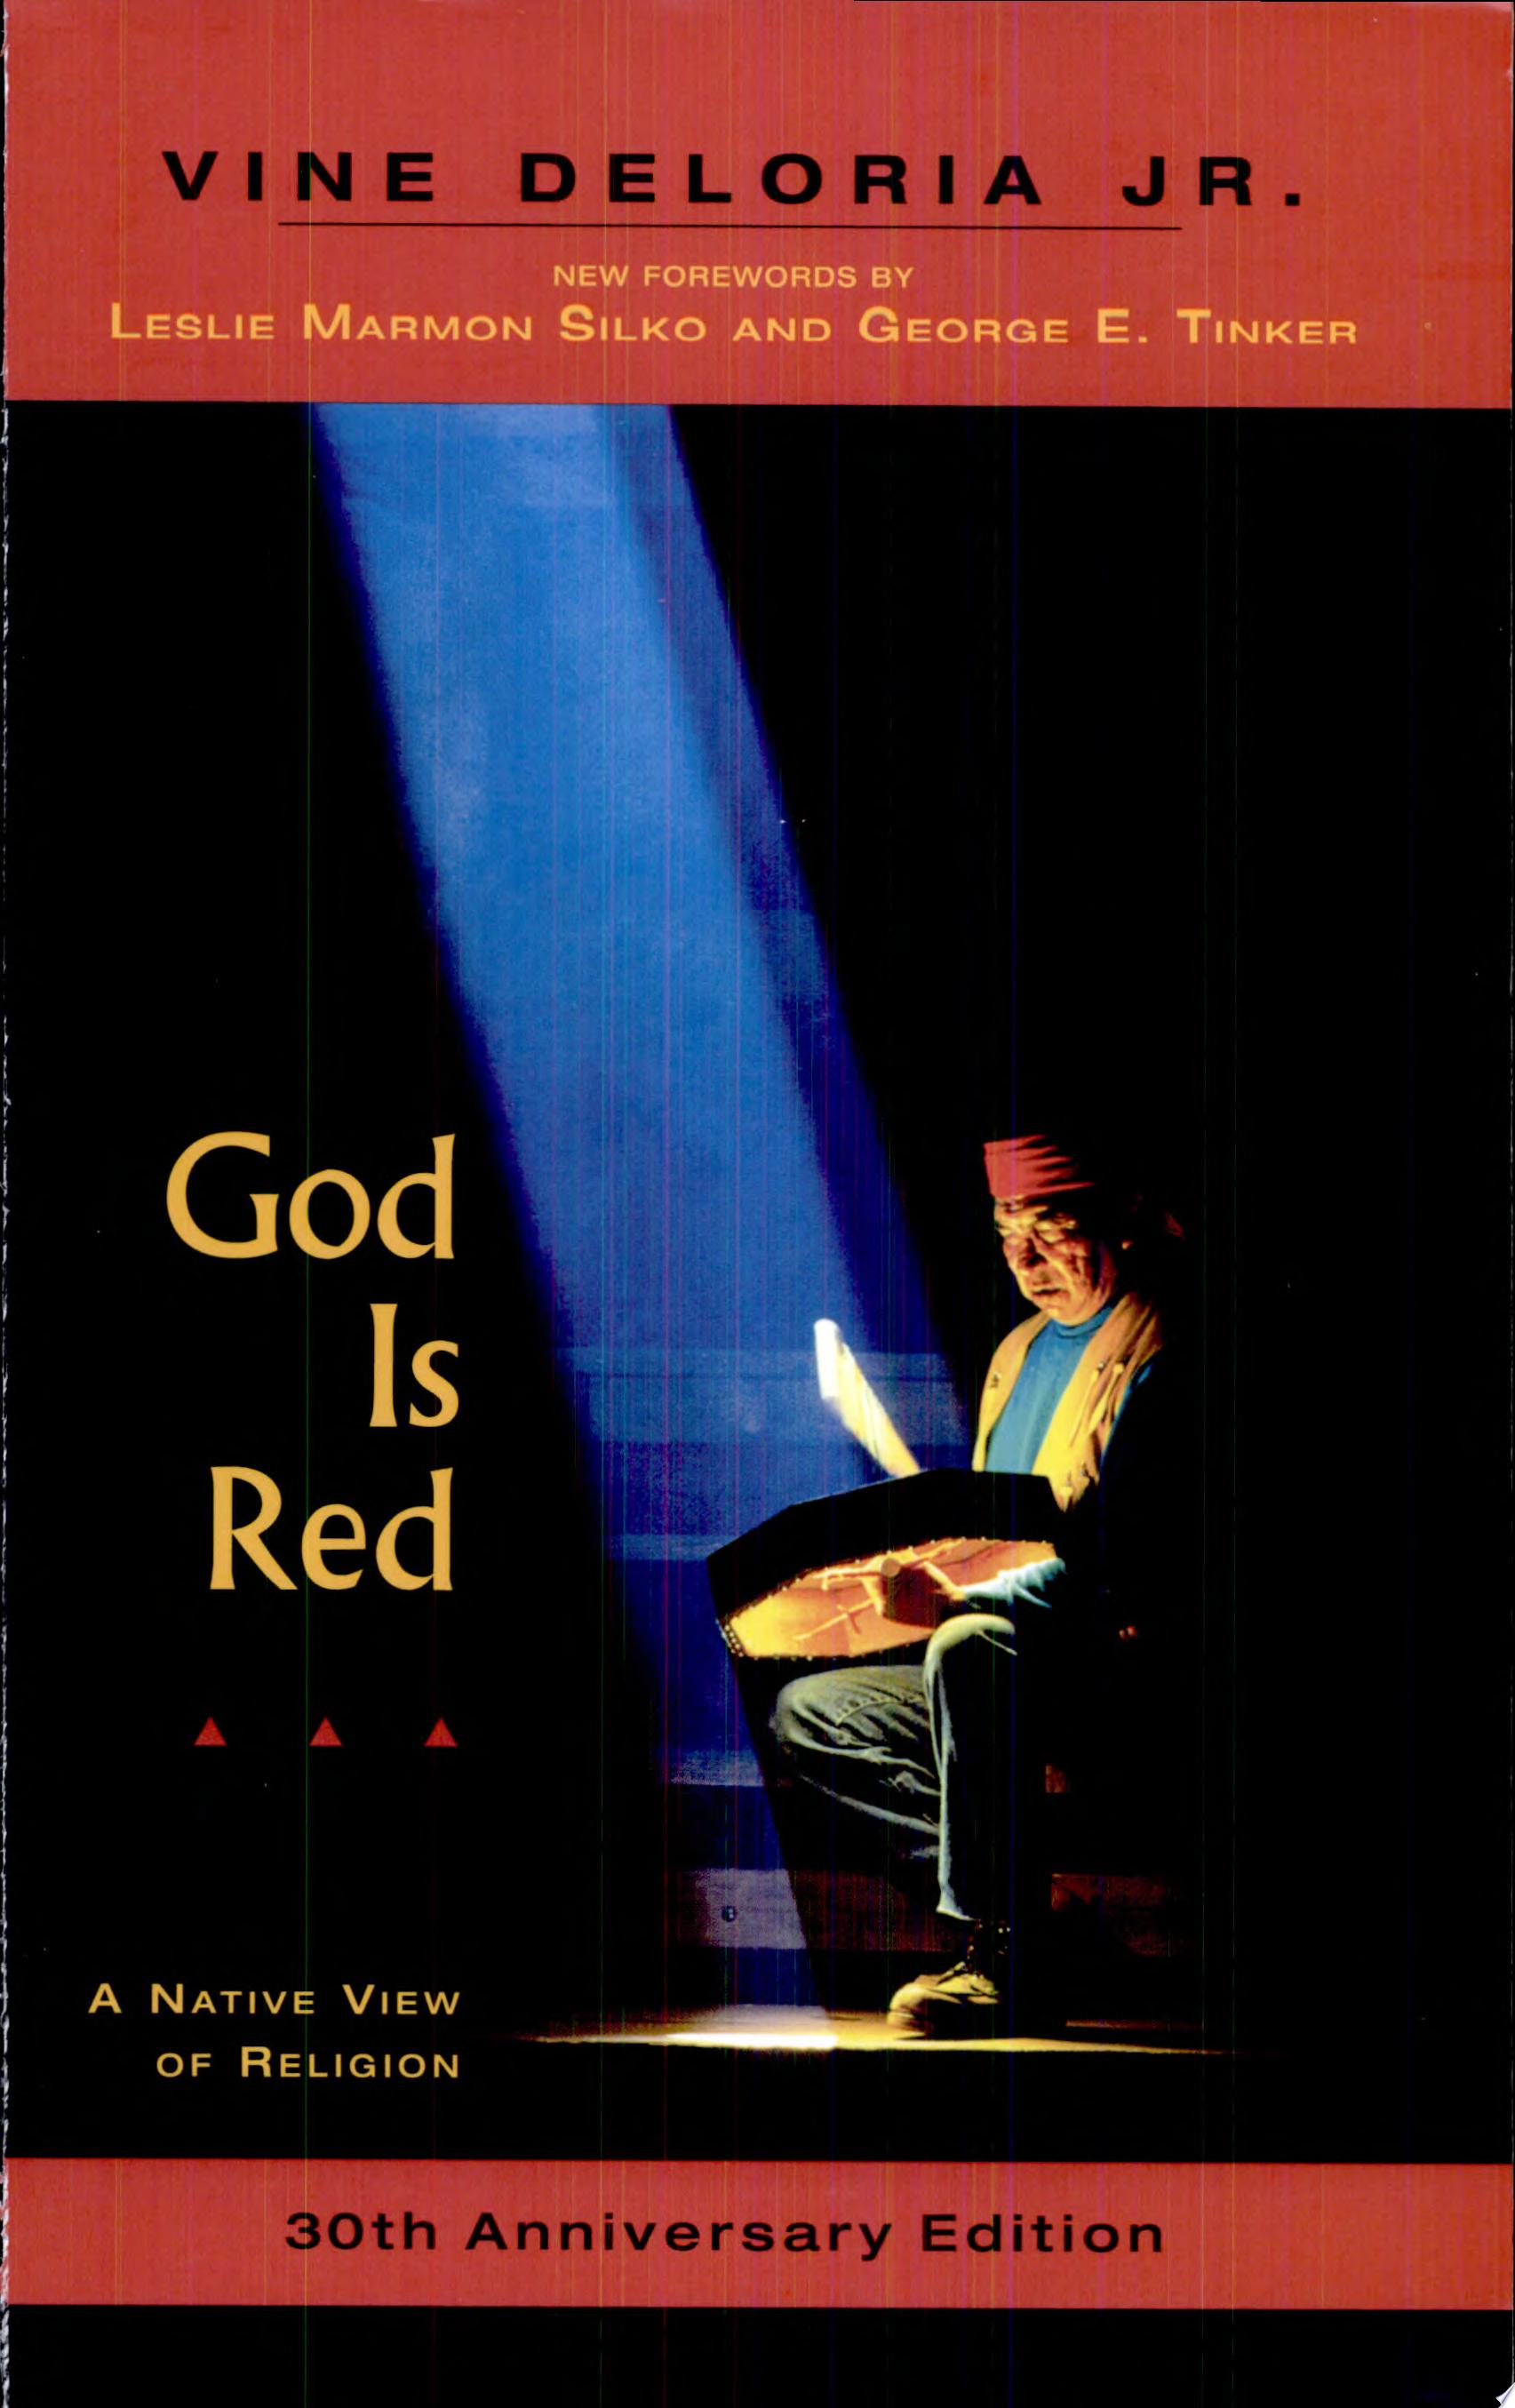 Image for "God is Red"